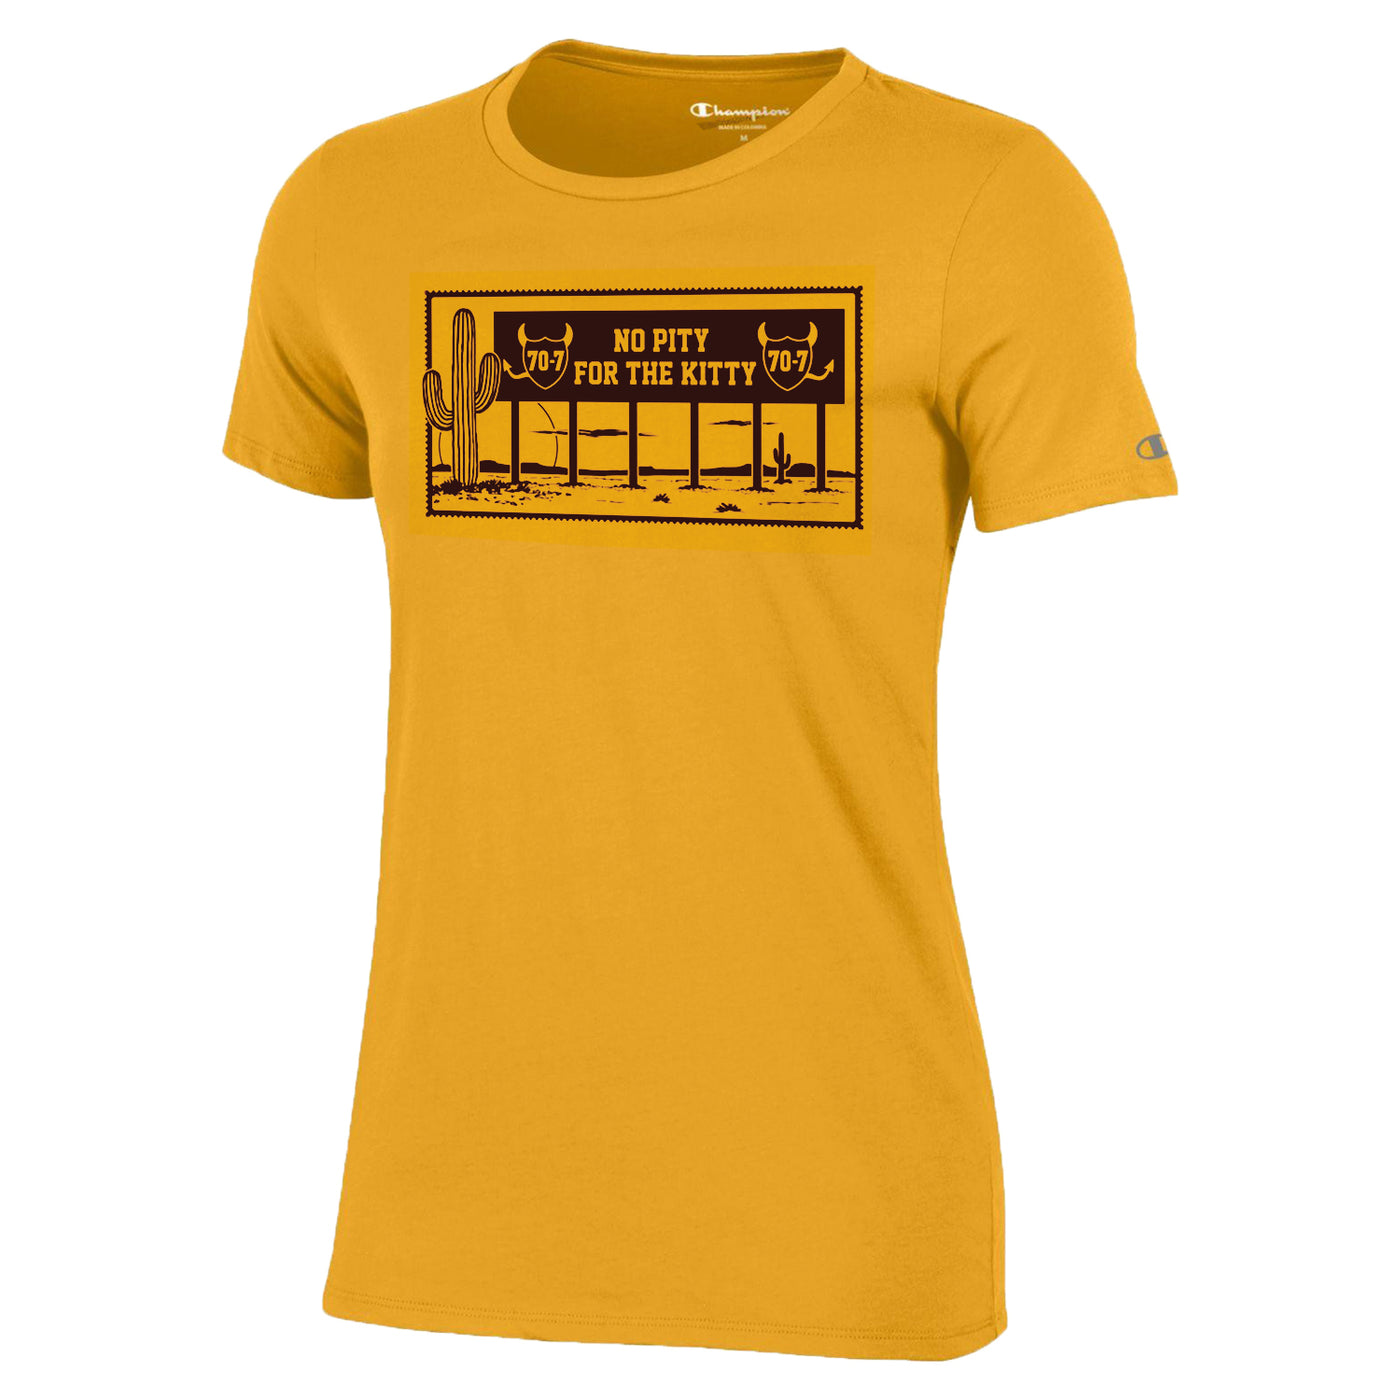 ASU women's gold tee with rectangle image of billboard showing '70-7' and 'No Pity For The Pity' in a desert setting